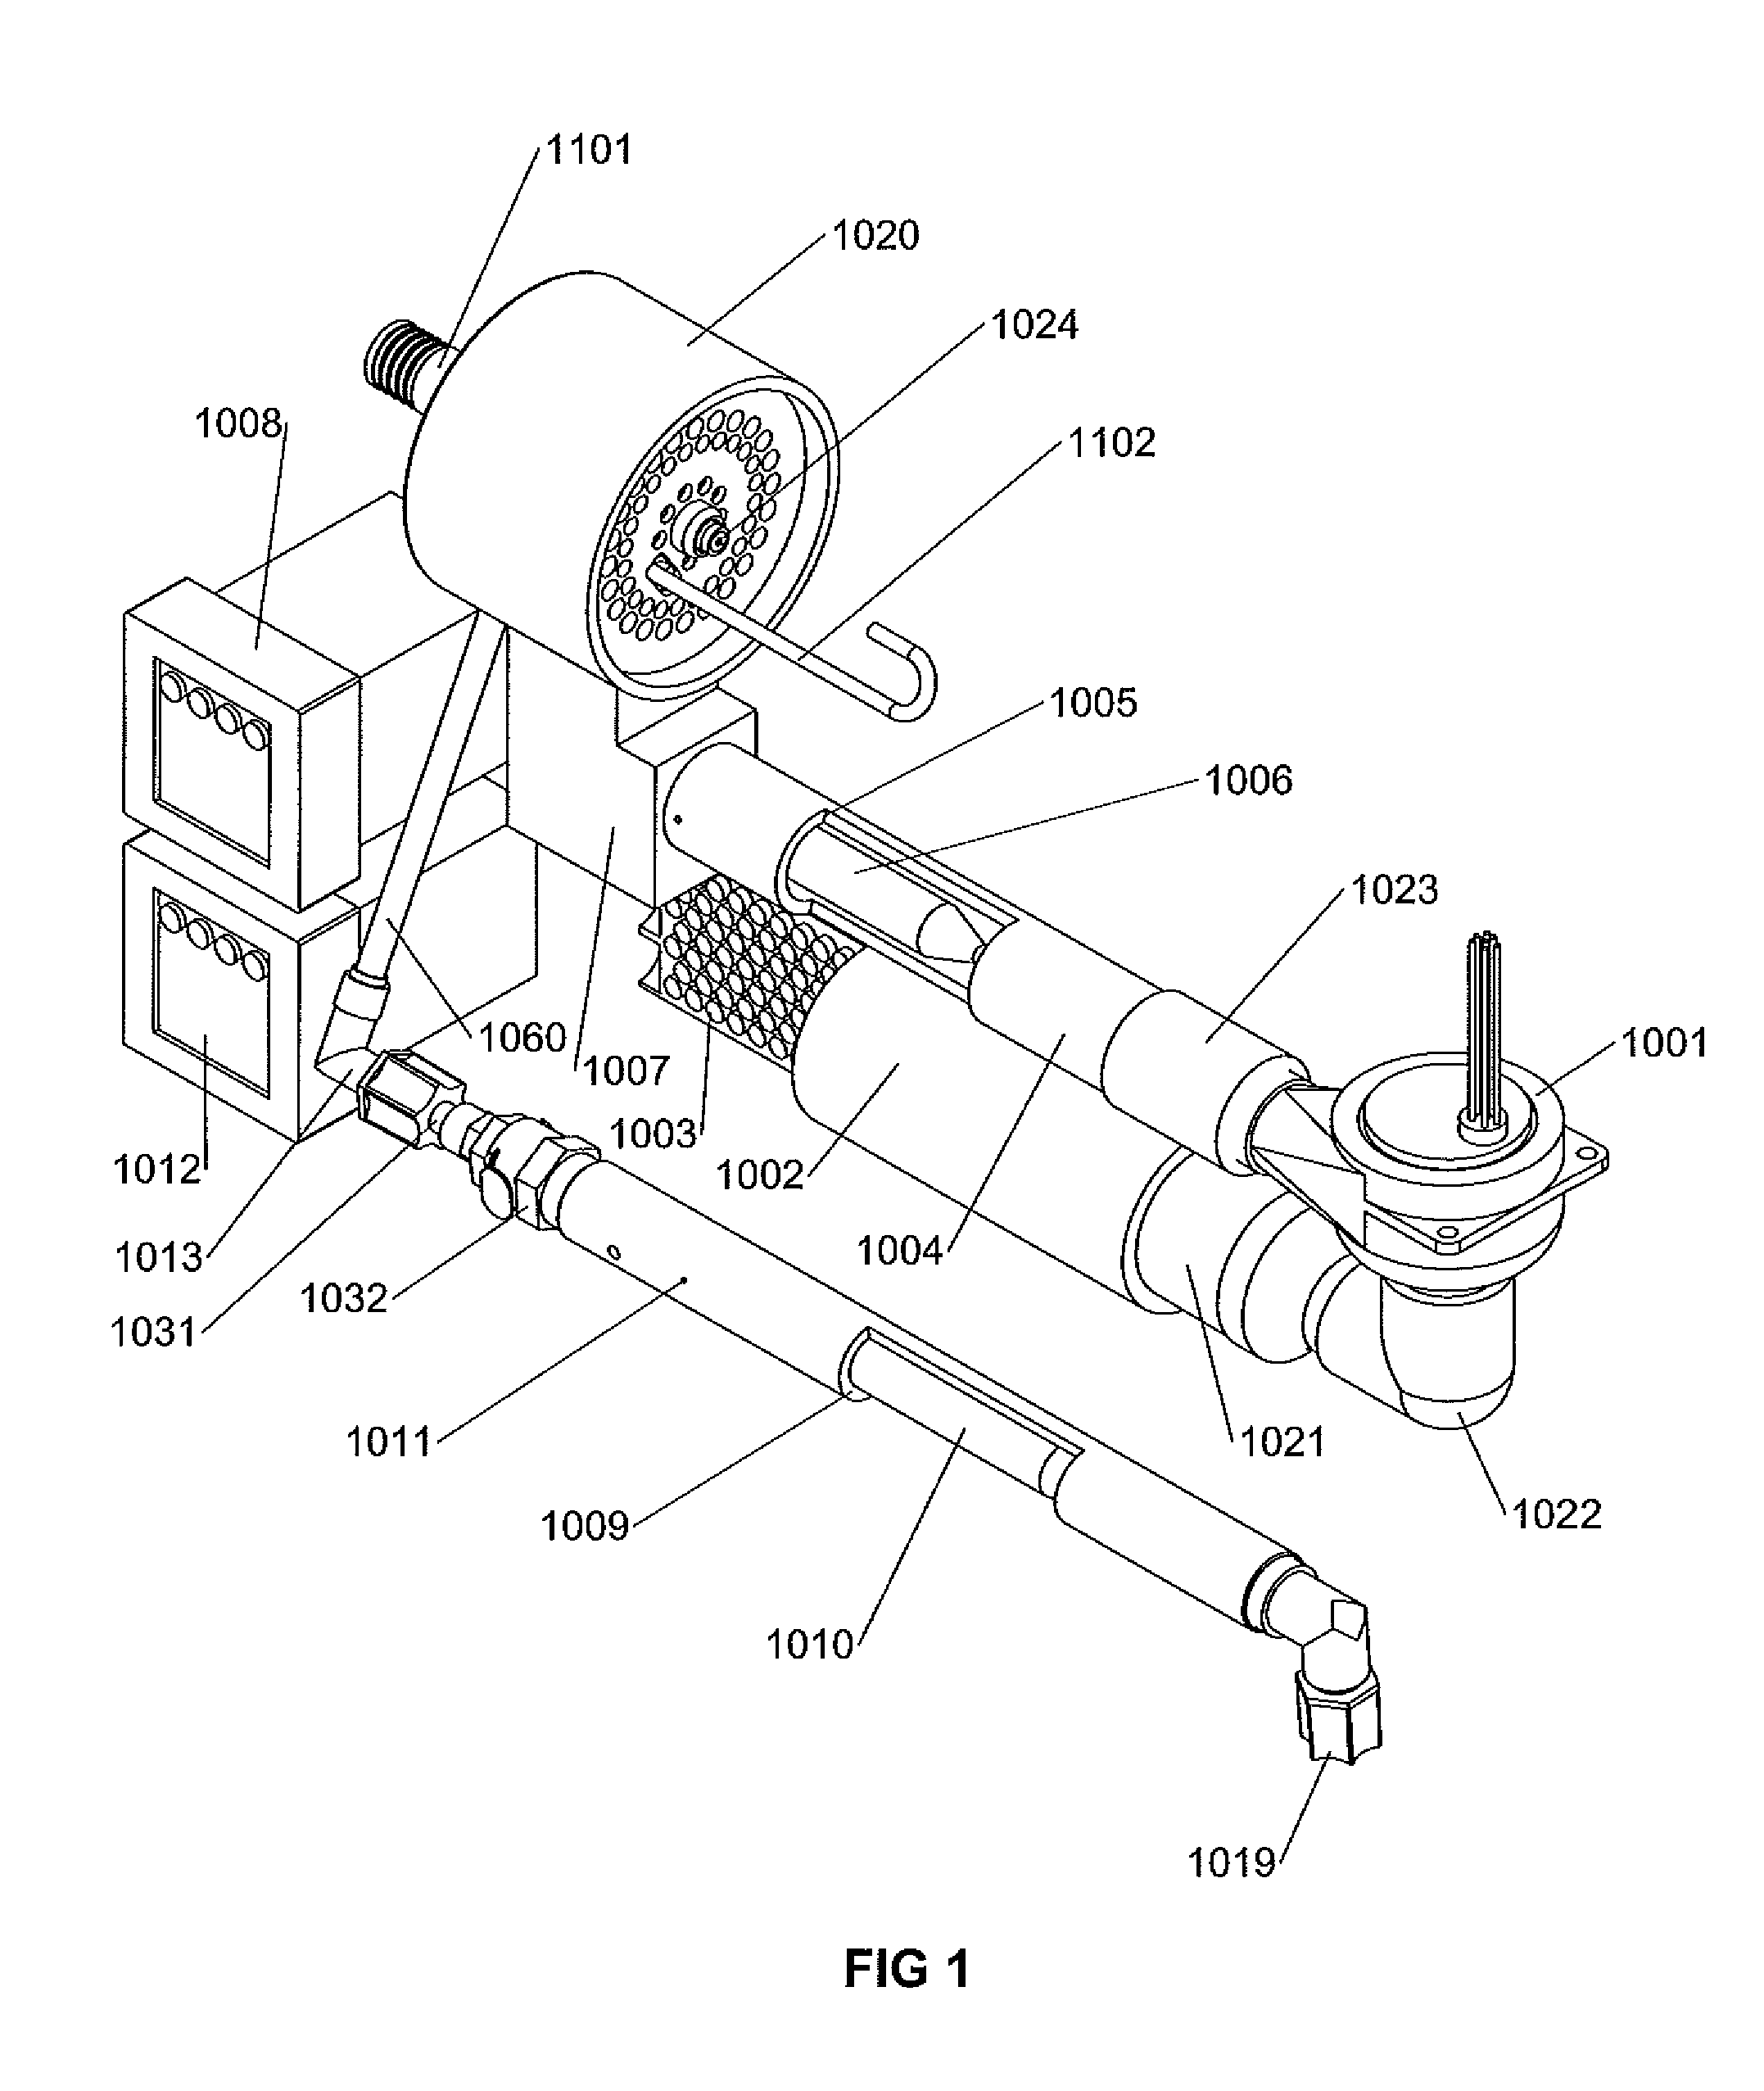 Flow conditioner for a compact, low flow resistance aerosol generator